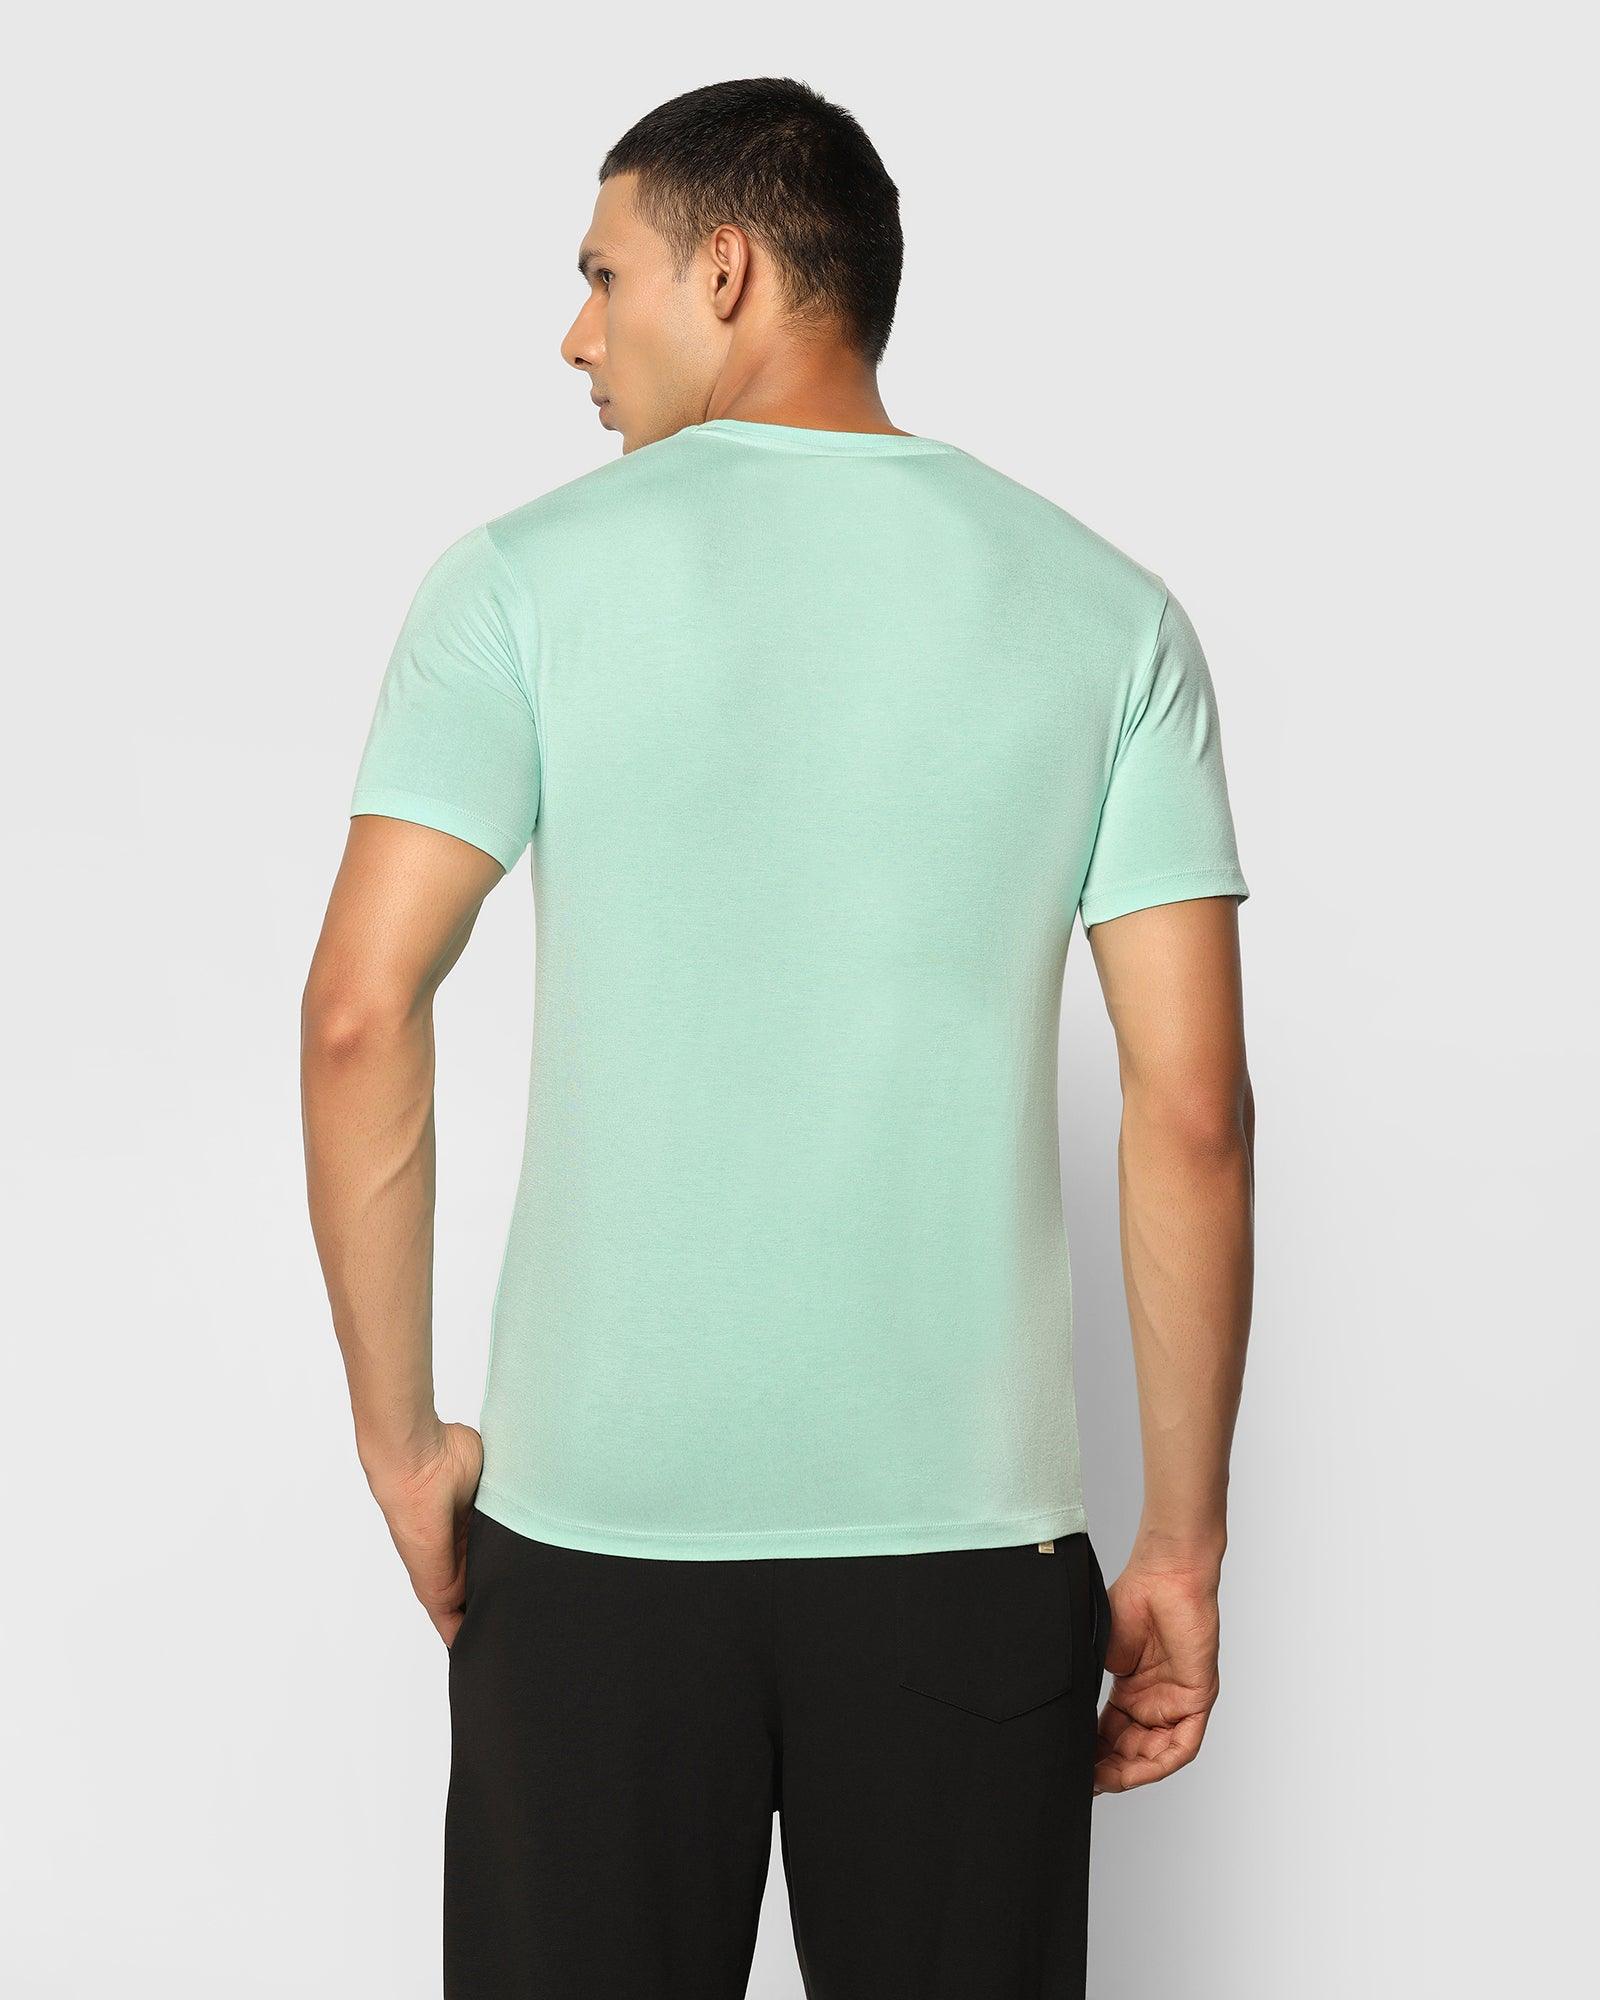 Crew Neck Mint Solid T-Shirt - Hola